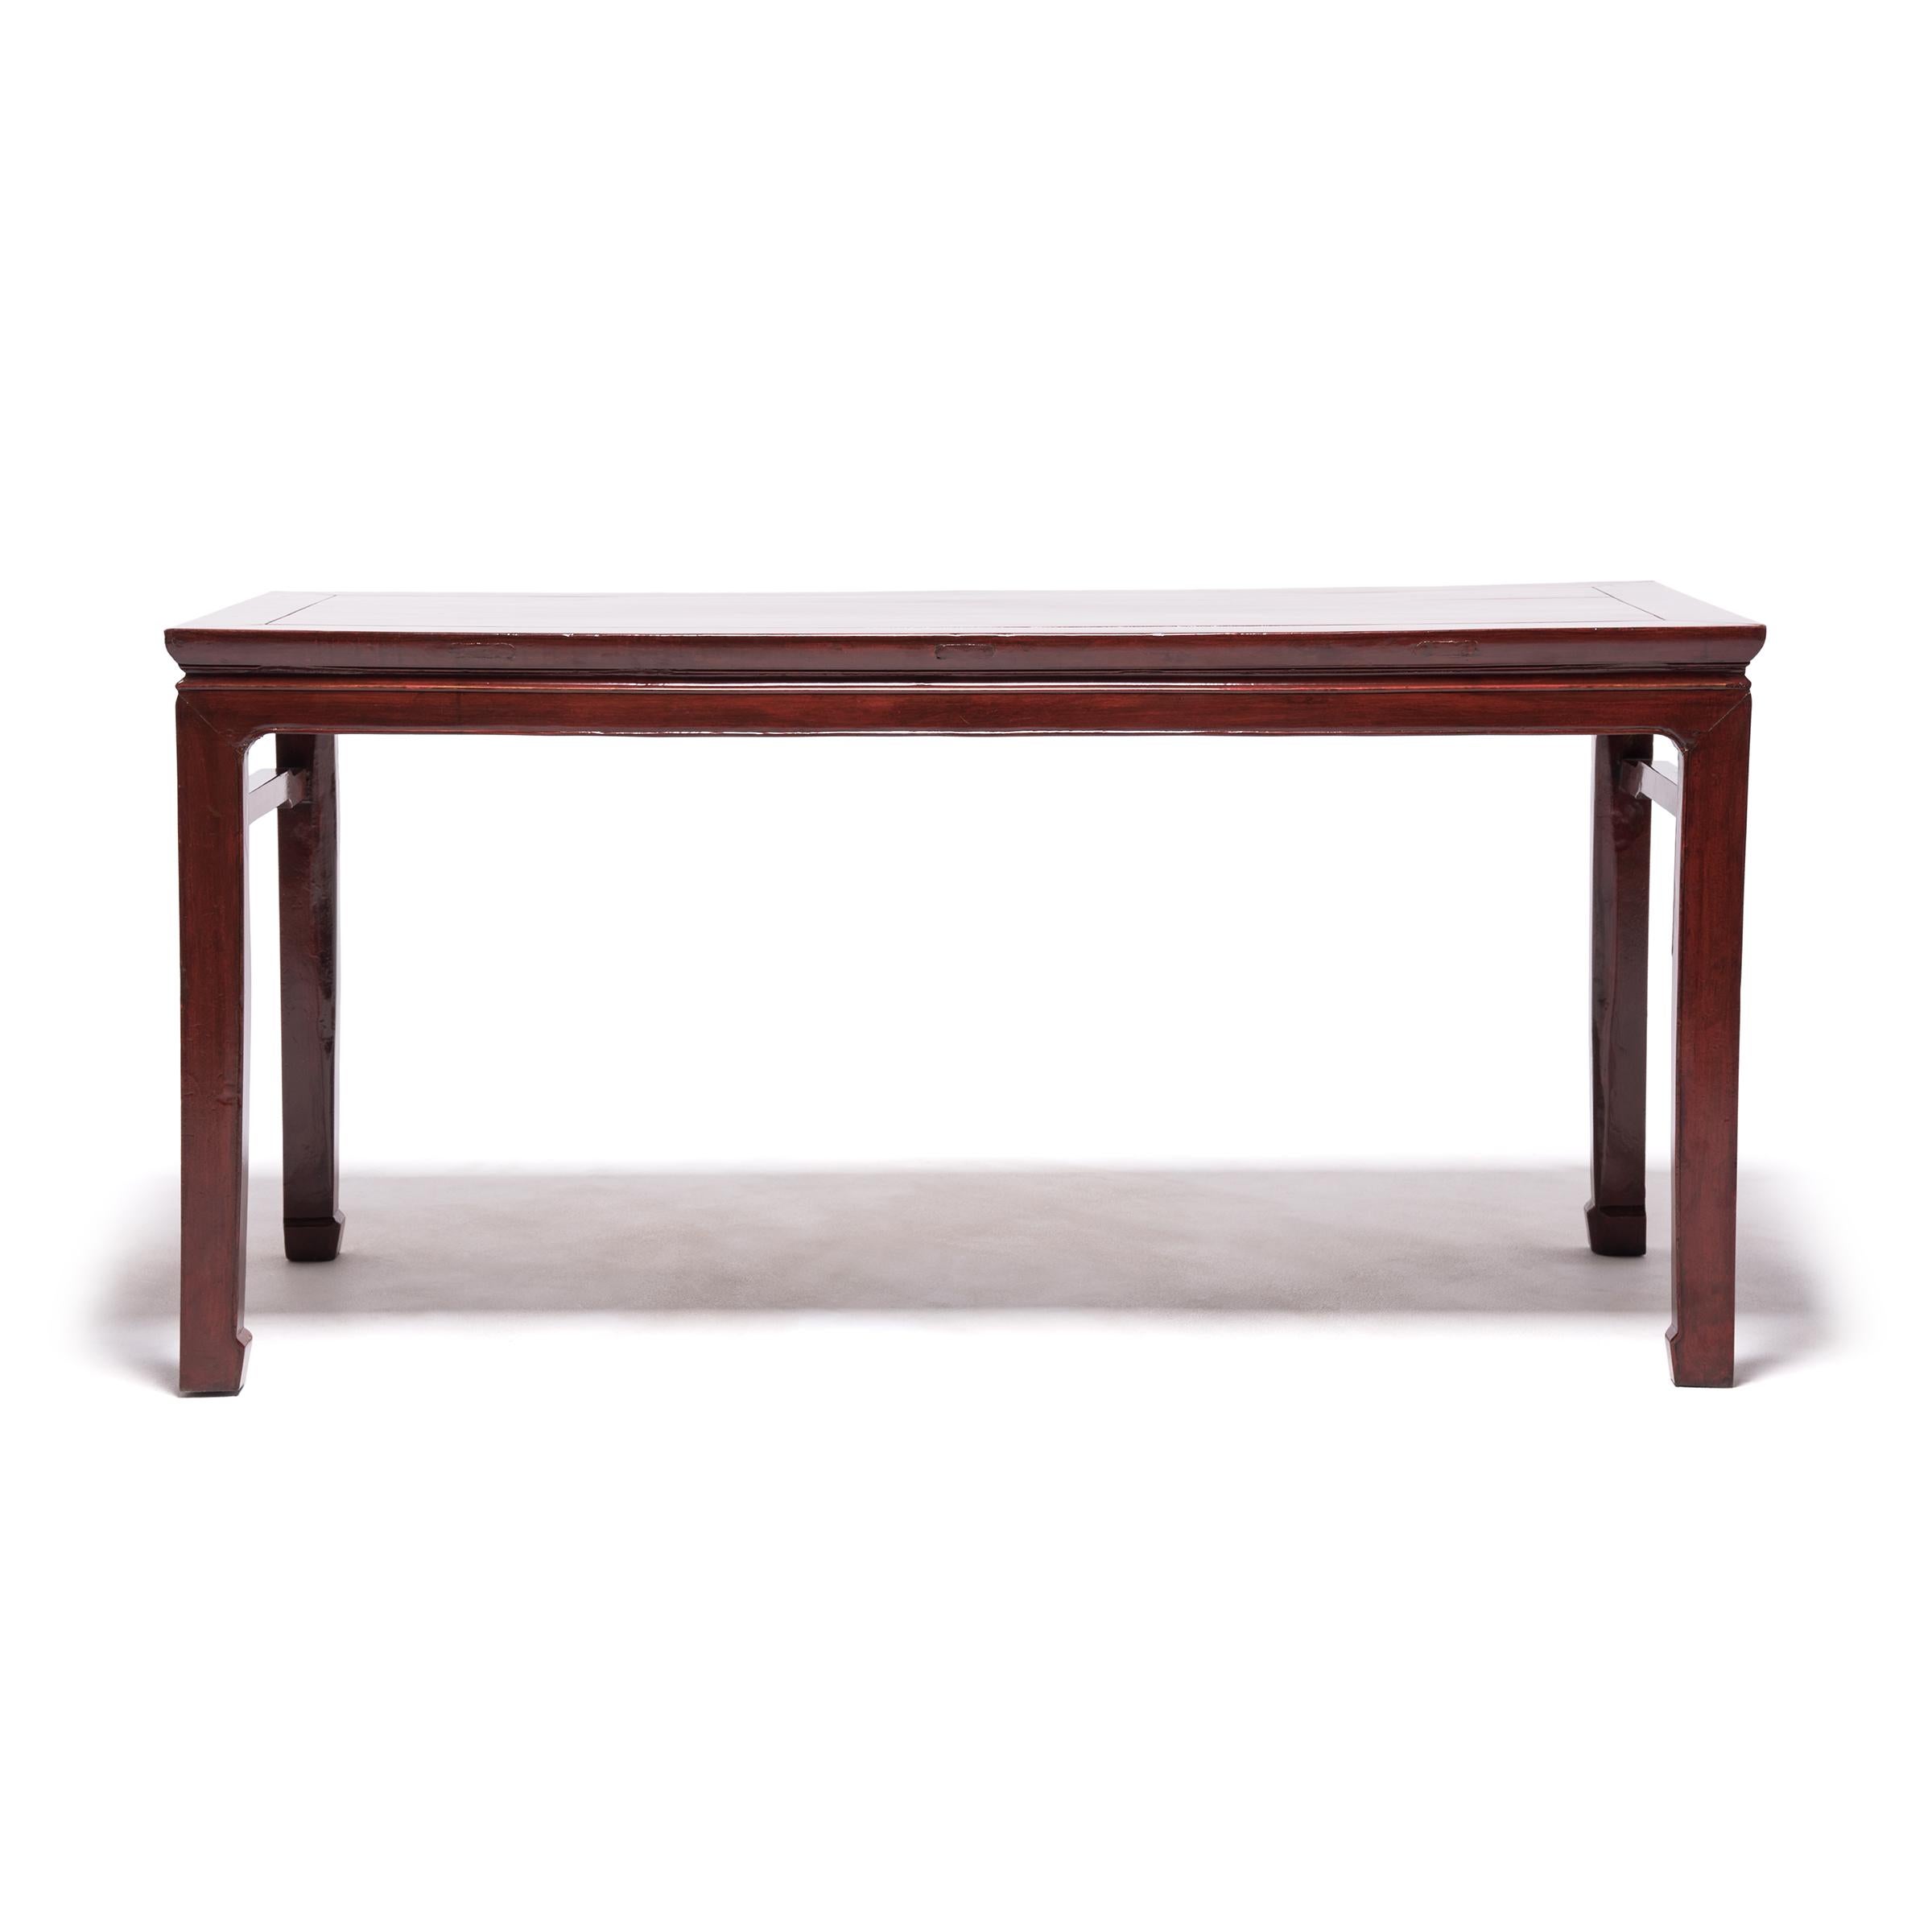 This elegant elmwood painting table was crafted over a century ago by artisans in northern China. The broad tabletop provided an ideal surface for unfurling a scroll to compose poetry or calligraphy paintings. The table is beautifully proportioned